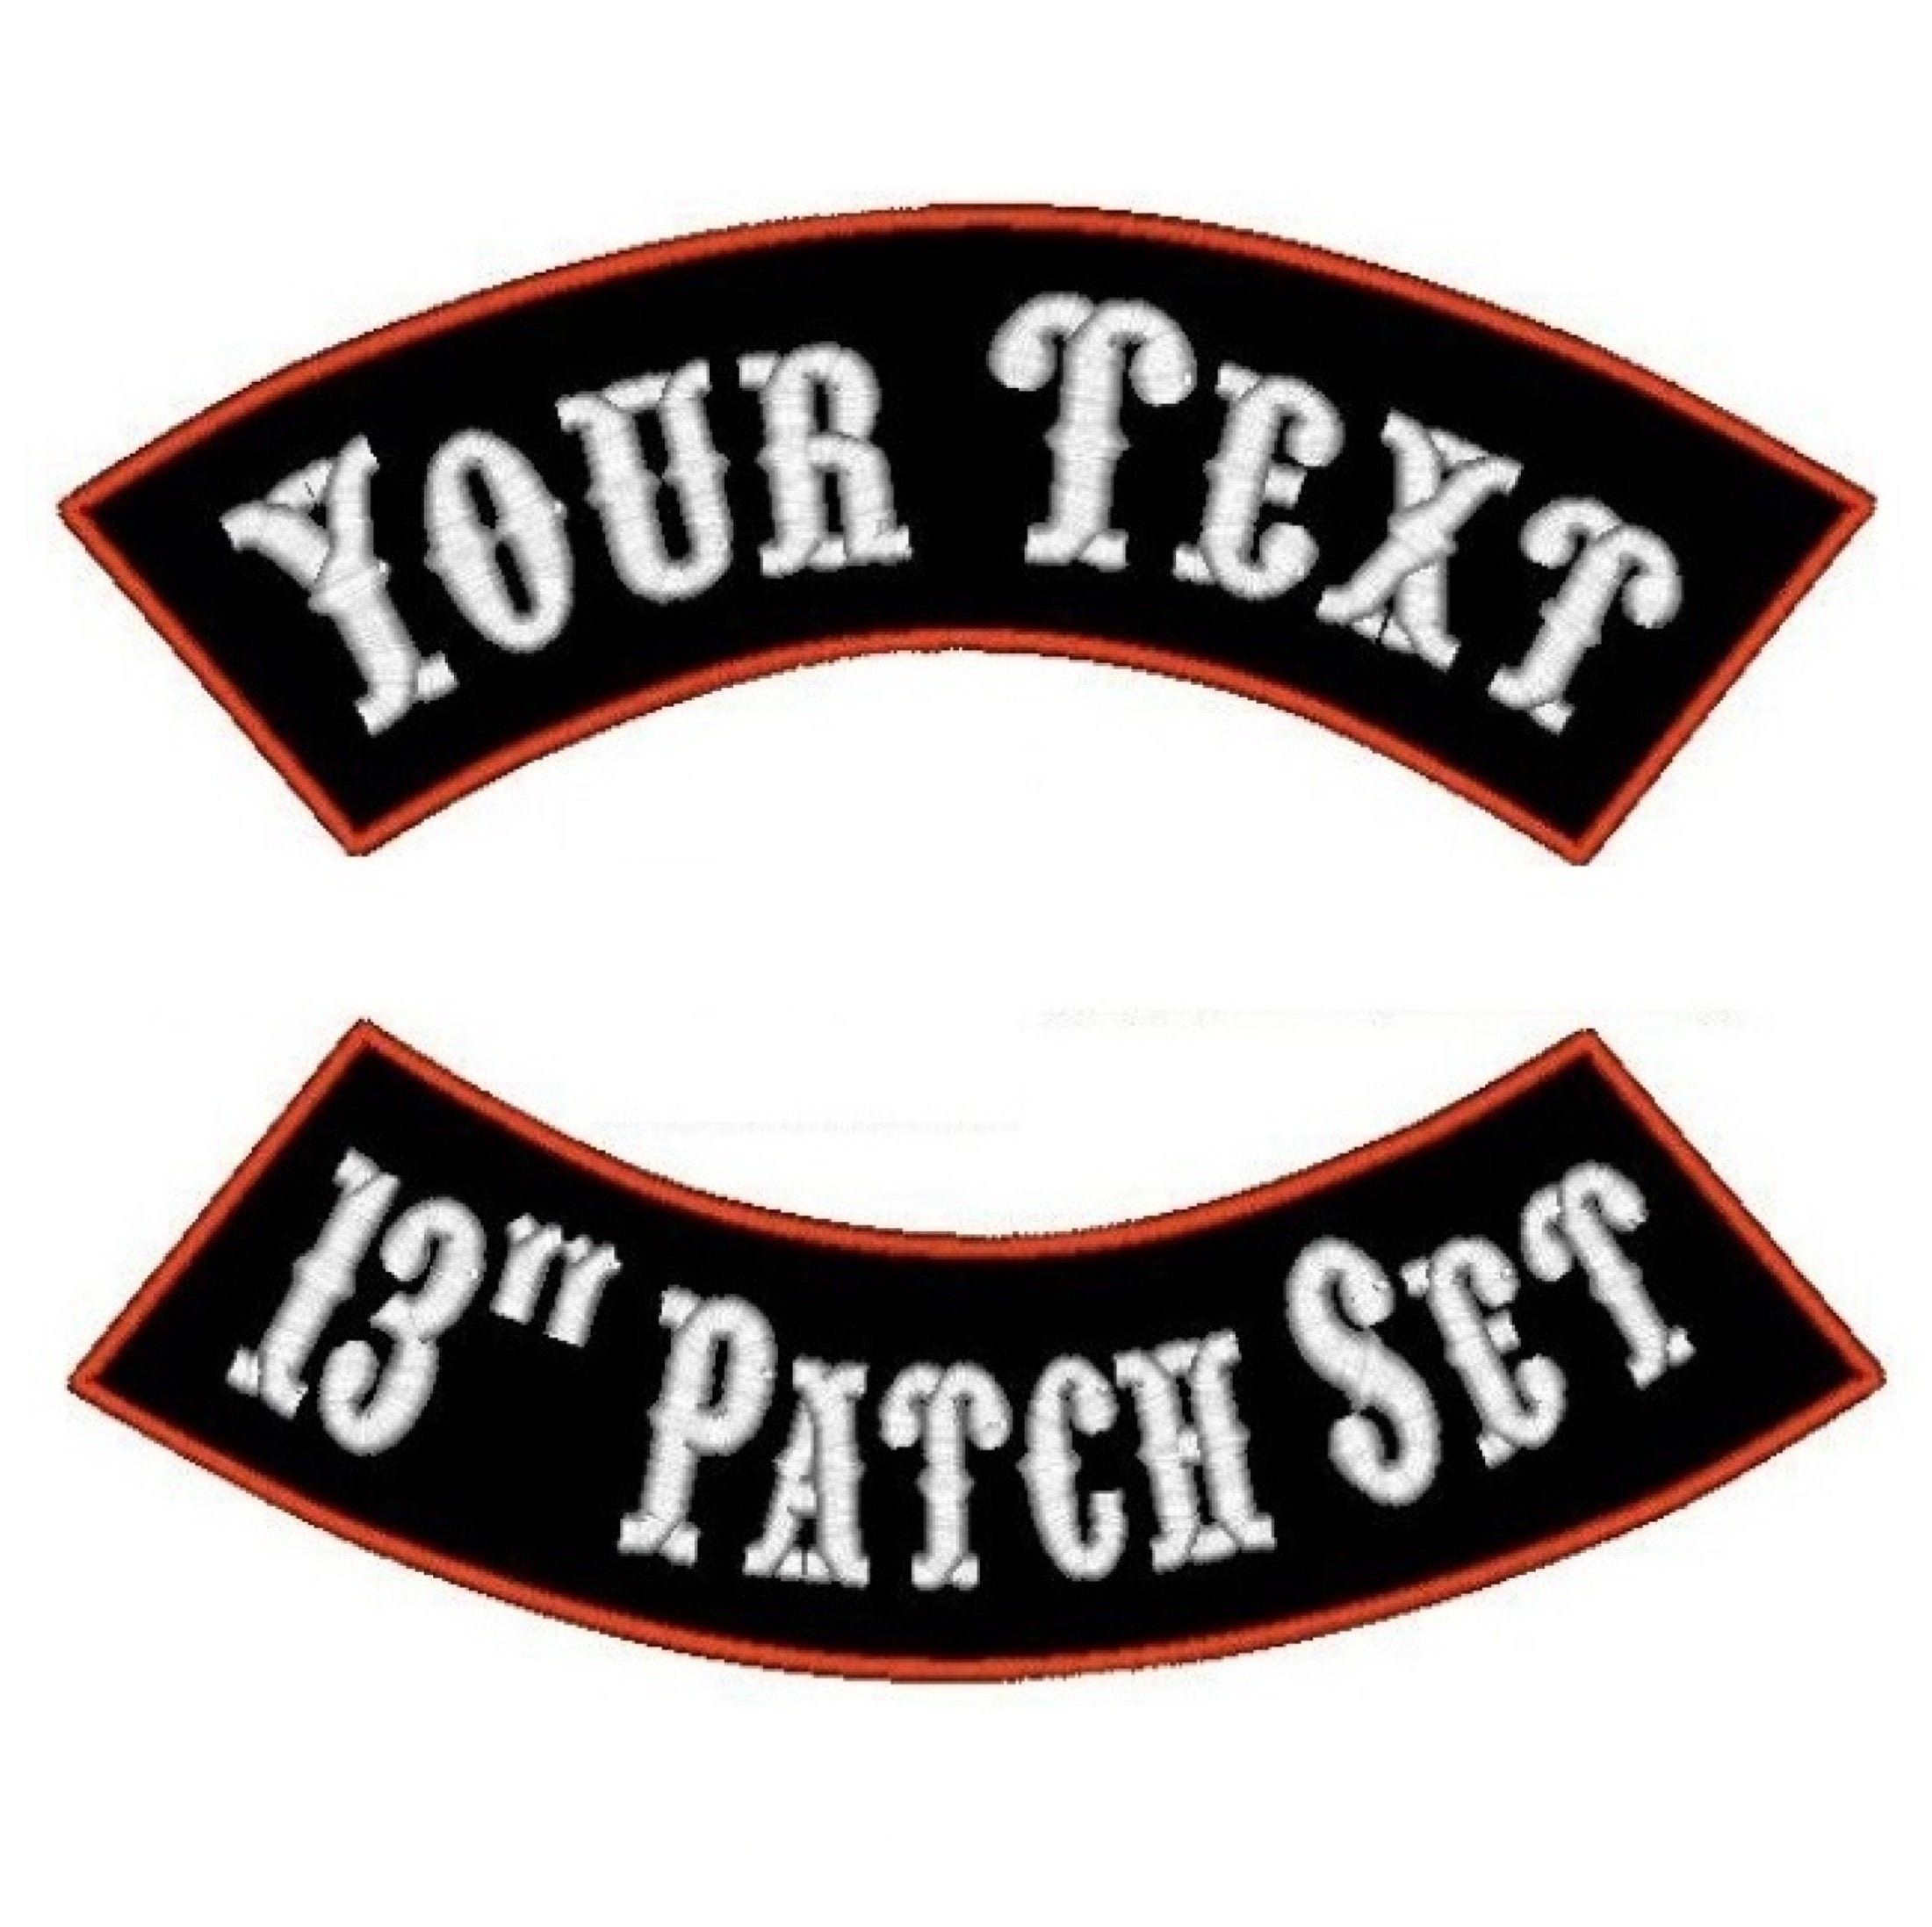  Custom Embroidered Patch Ribbon Rocker Name Tag MC Motorcycle  Biker Sew on Patches - 8 inch Set (E-2) - 7 pc